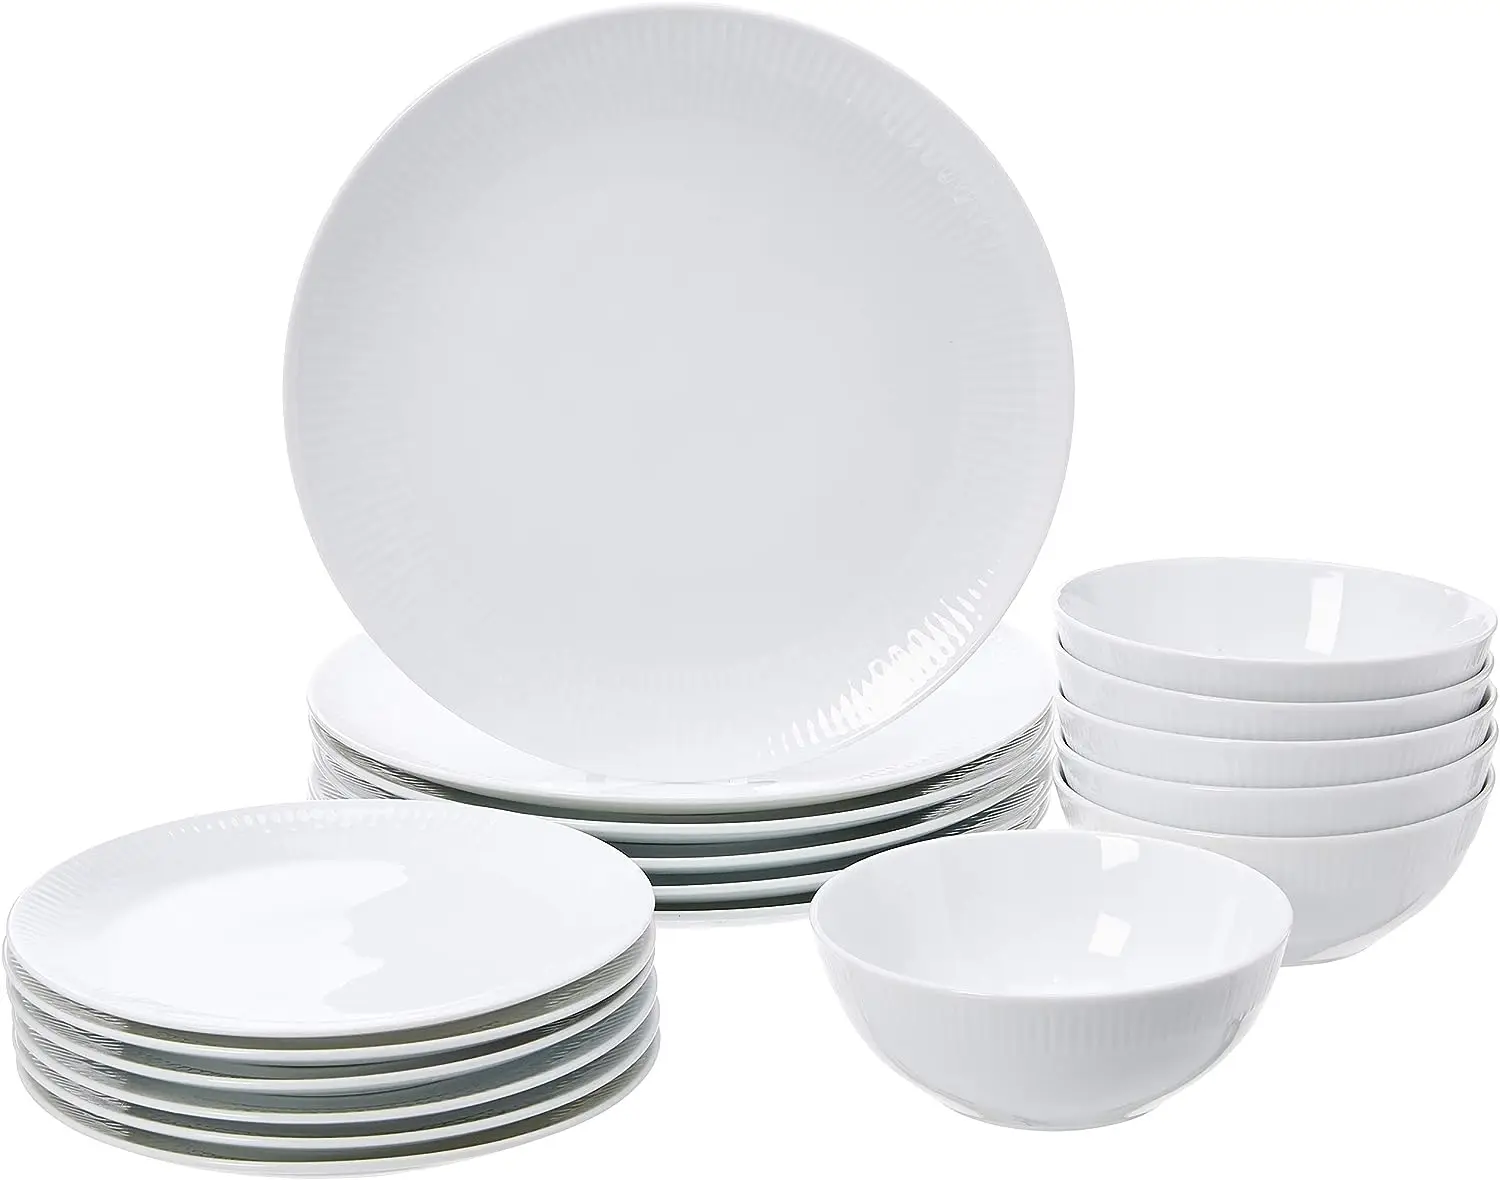 

18-Piece Kitchen Dinnerware Set, Plates, Dishes, Bowls, Service for 6, White Porcelain with Trim